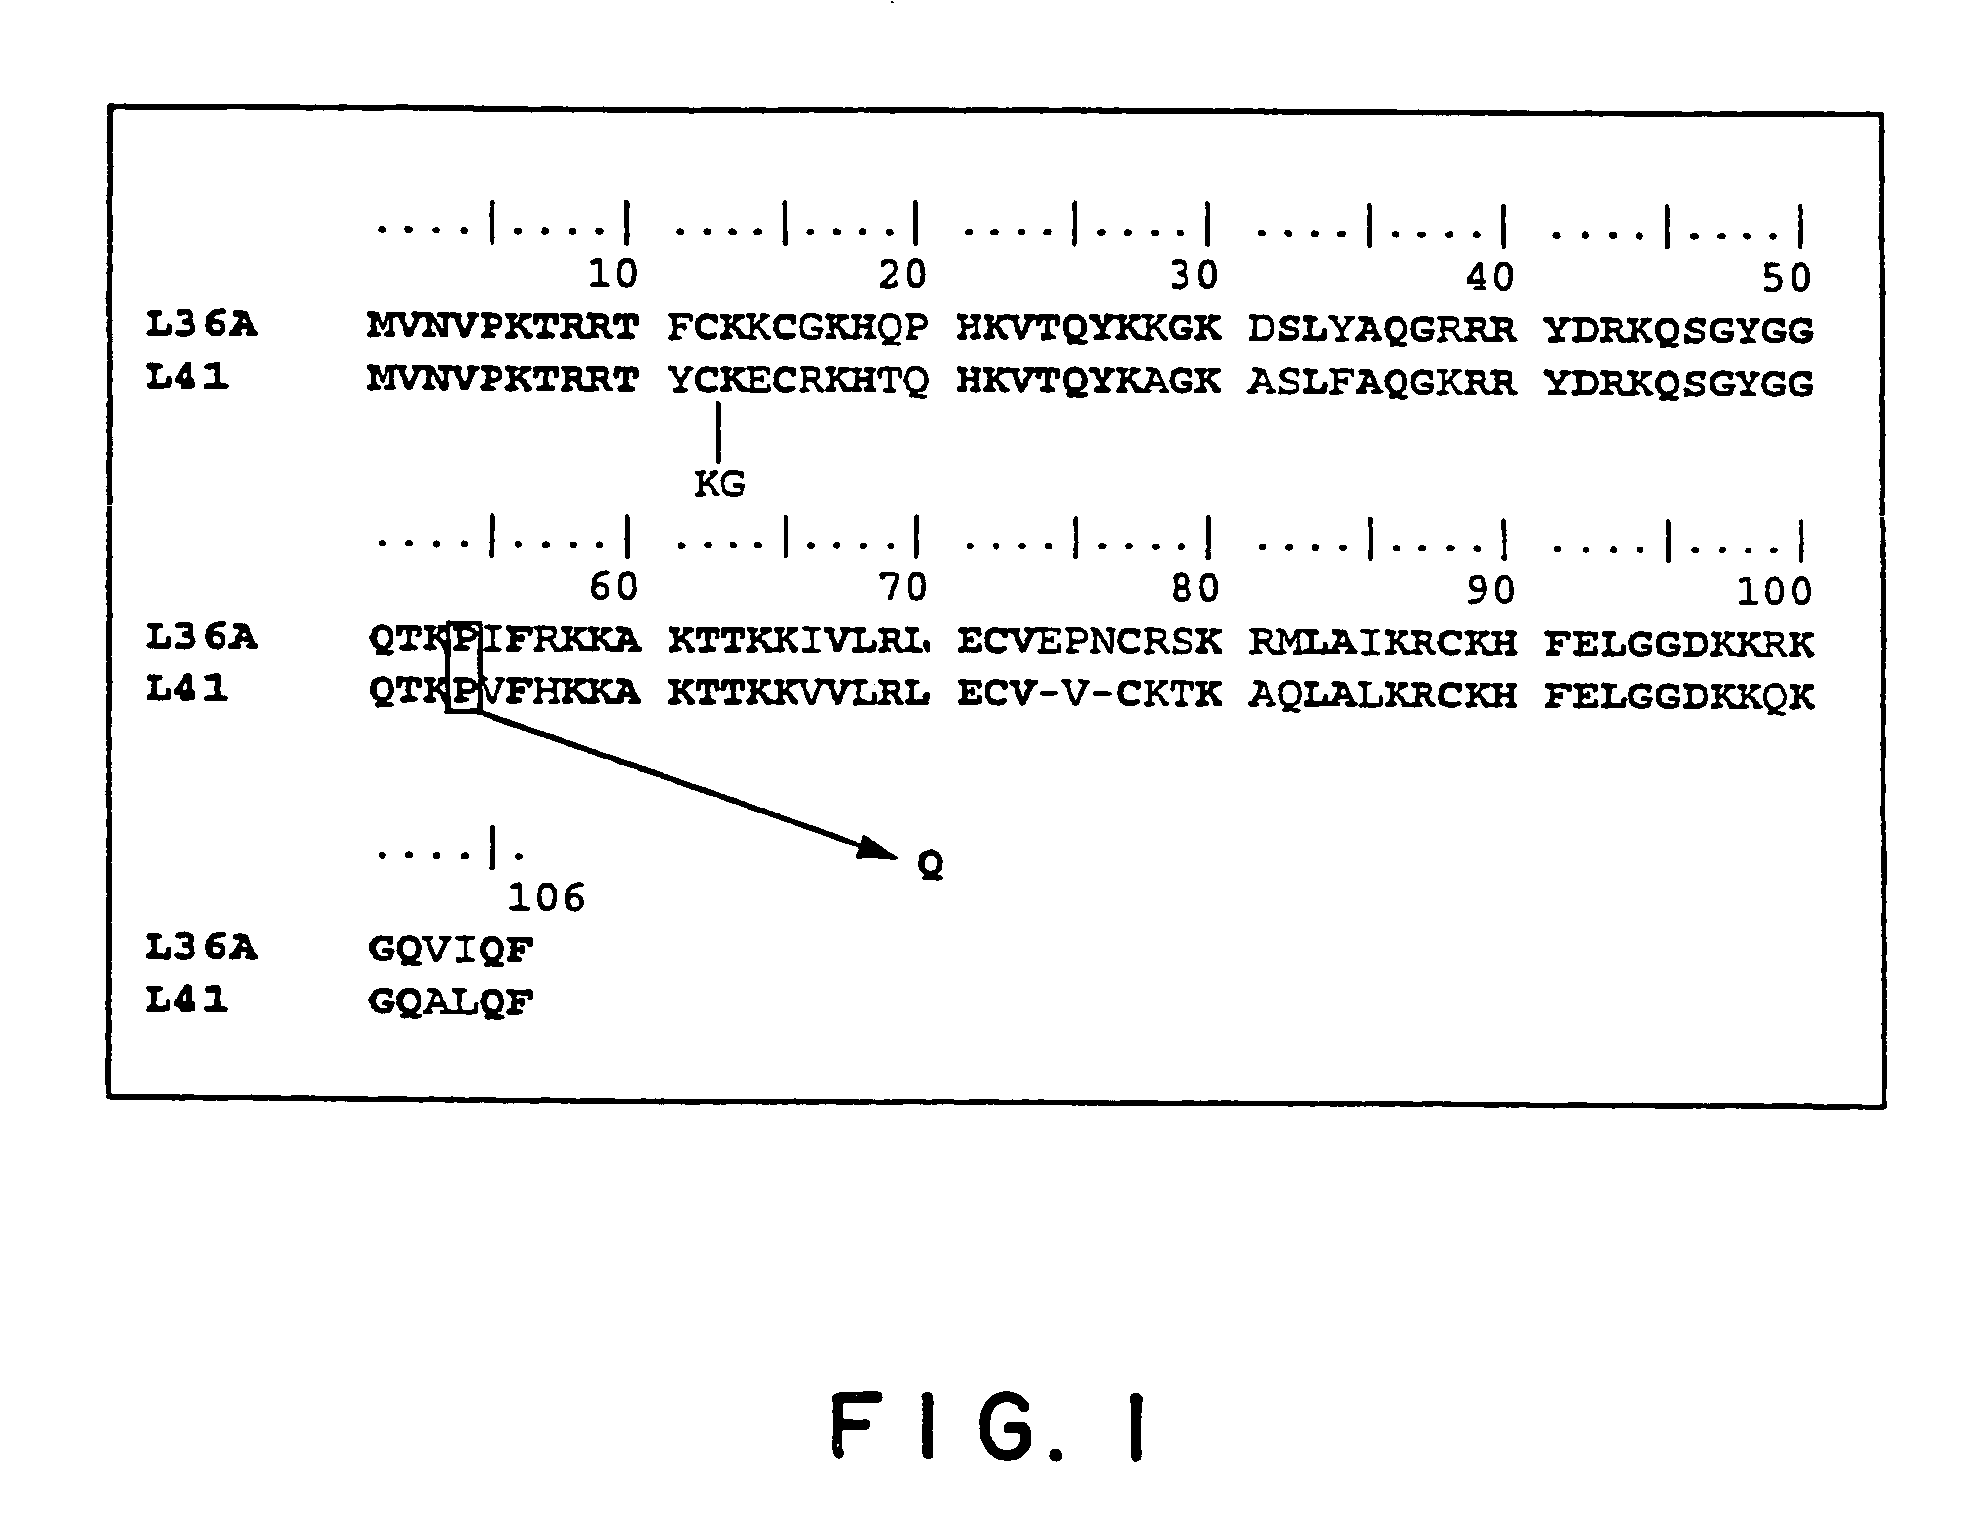 Vectors for animal cells and utilization thereof